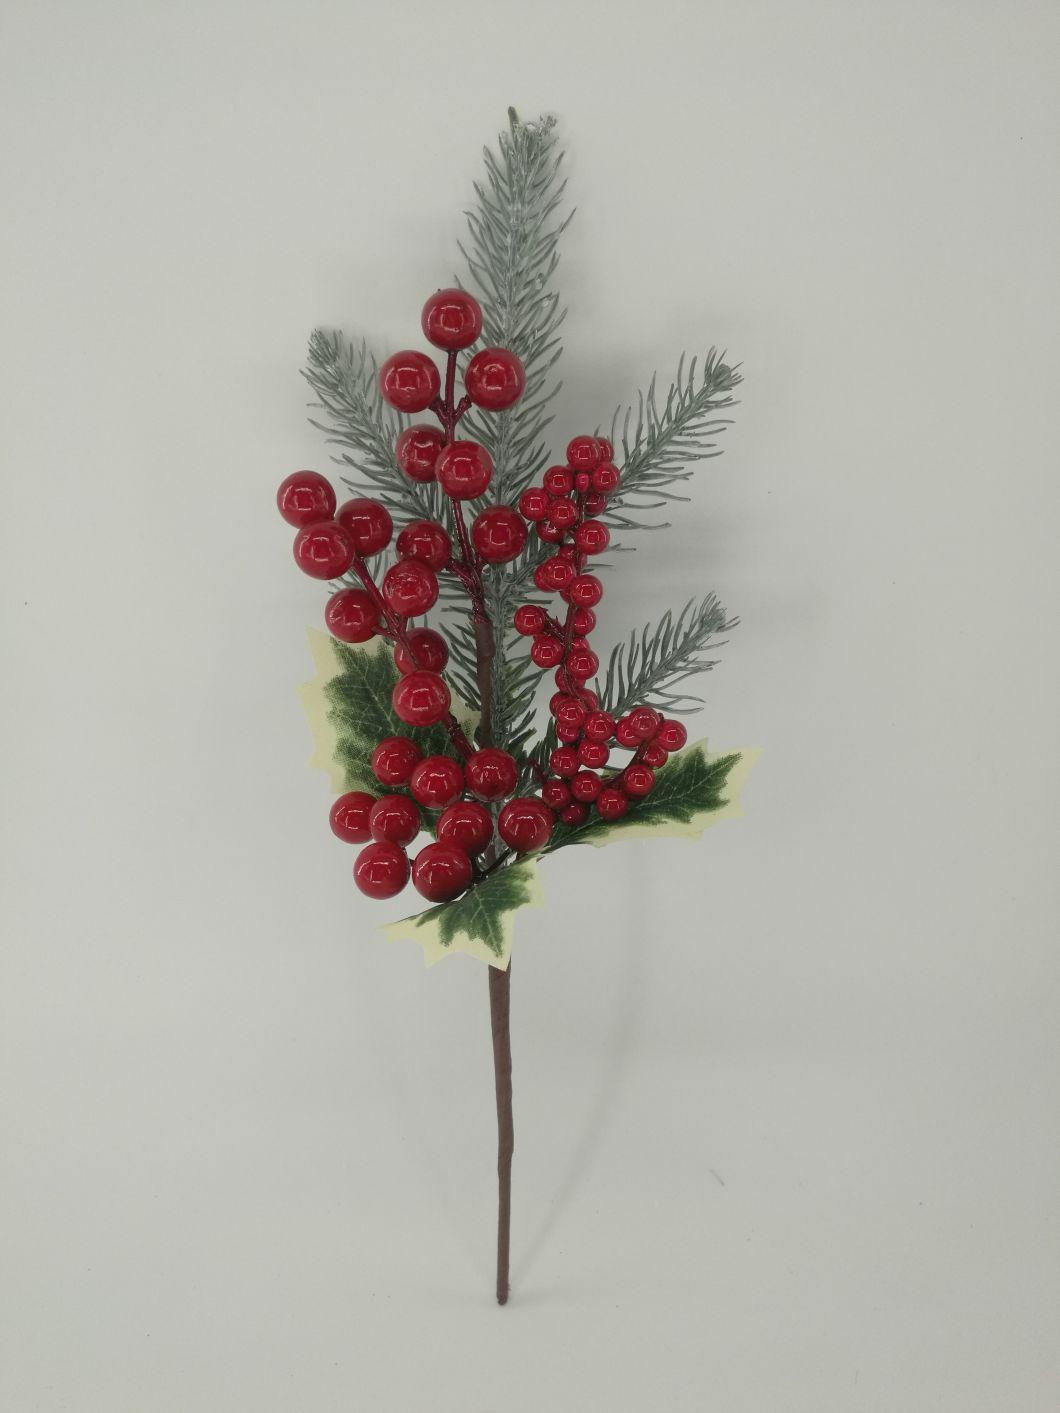 High Quality Artificial Christmas Glitters Pine and Berry Fruits Branch Red Berries Picks for Xmas Decoration